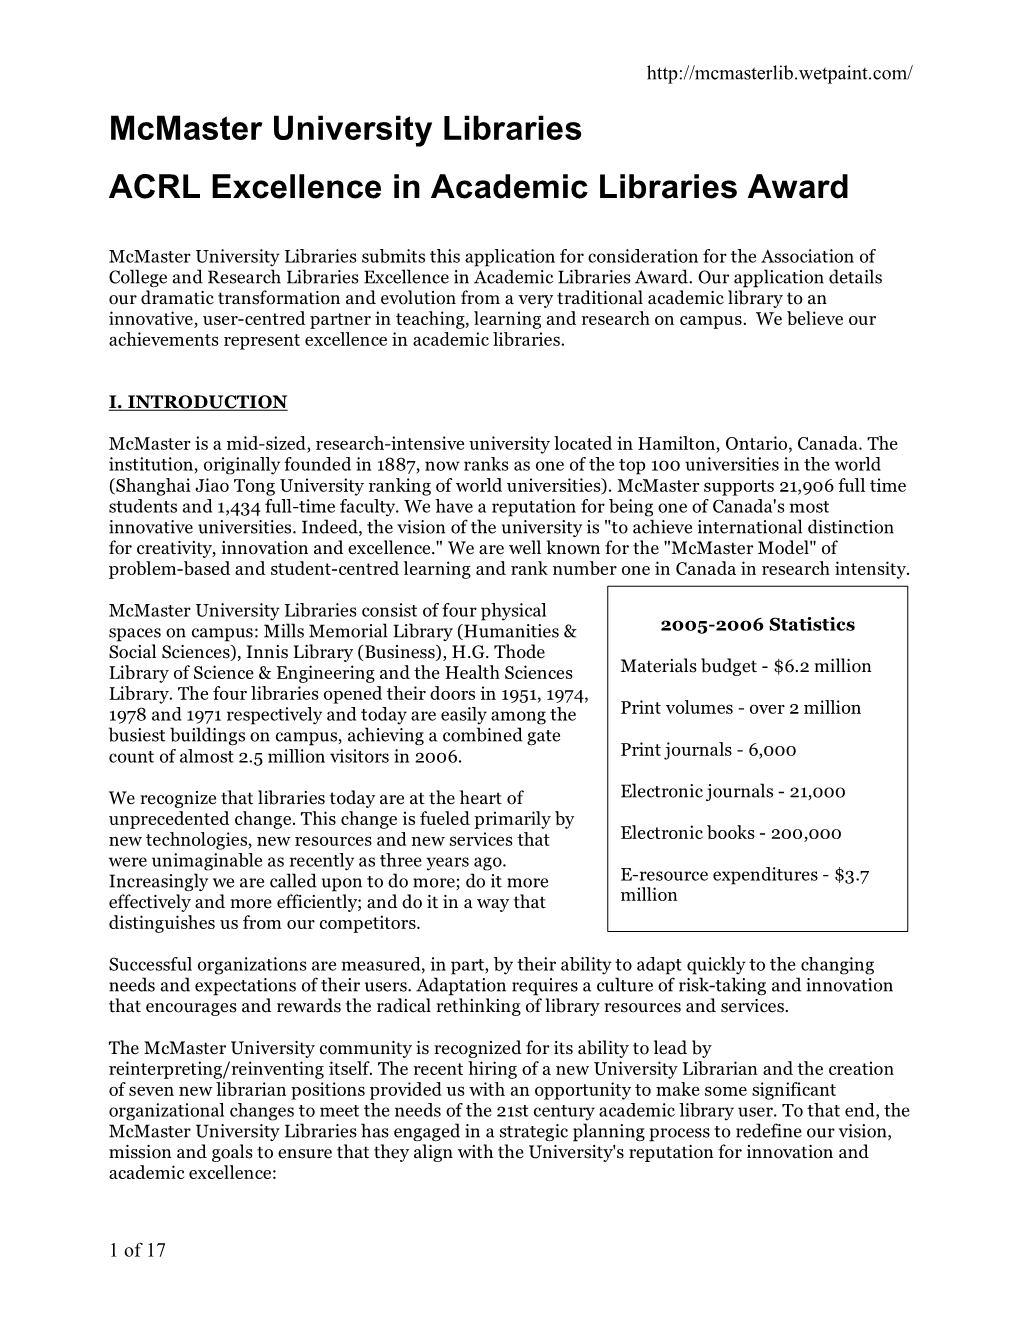 Mcmaster University Libraries ACRL Excellence in Academic Libraries Award